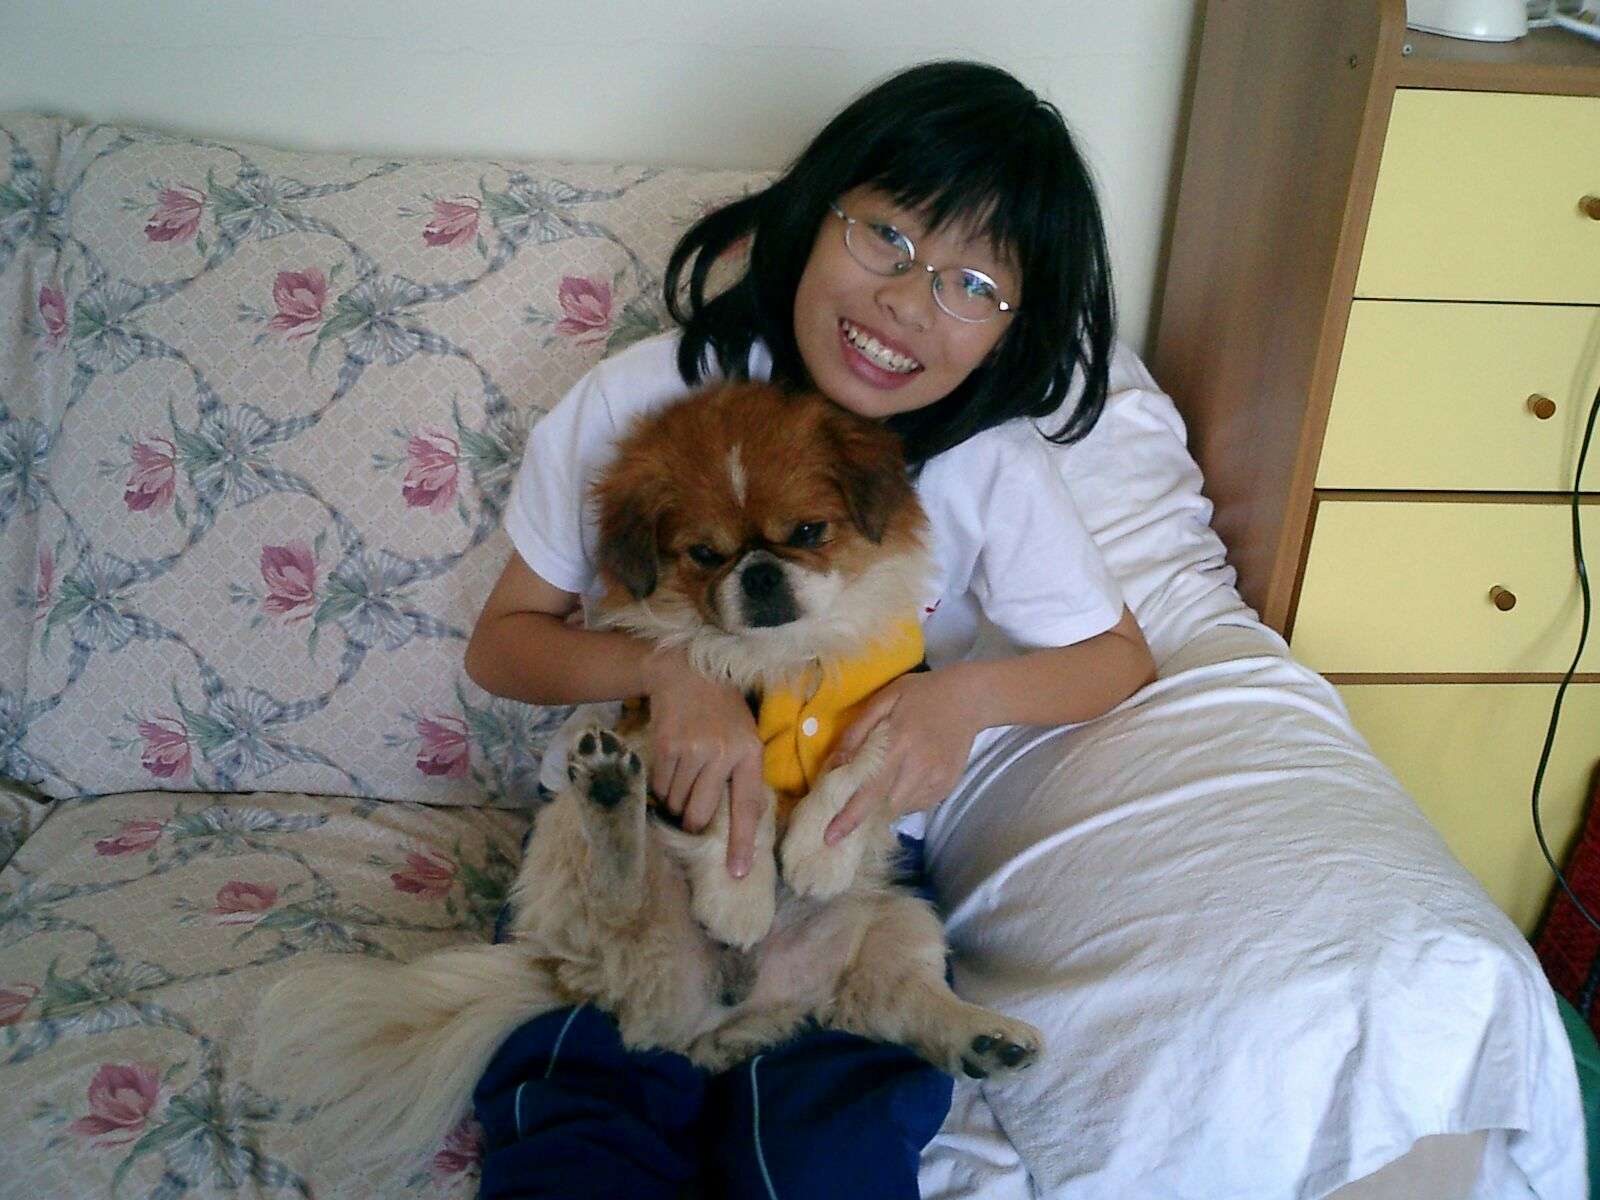 Candance Kwan's dog, Nacho, passed away peacefully a little more than a month ago at the ripe age of 13.